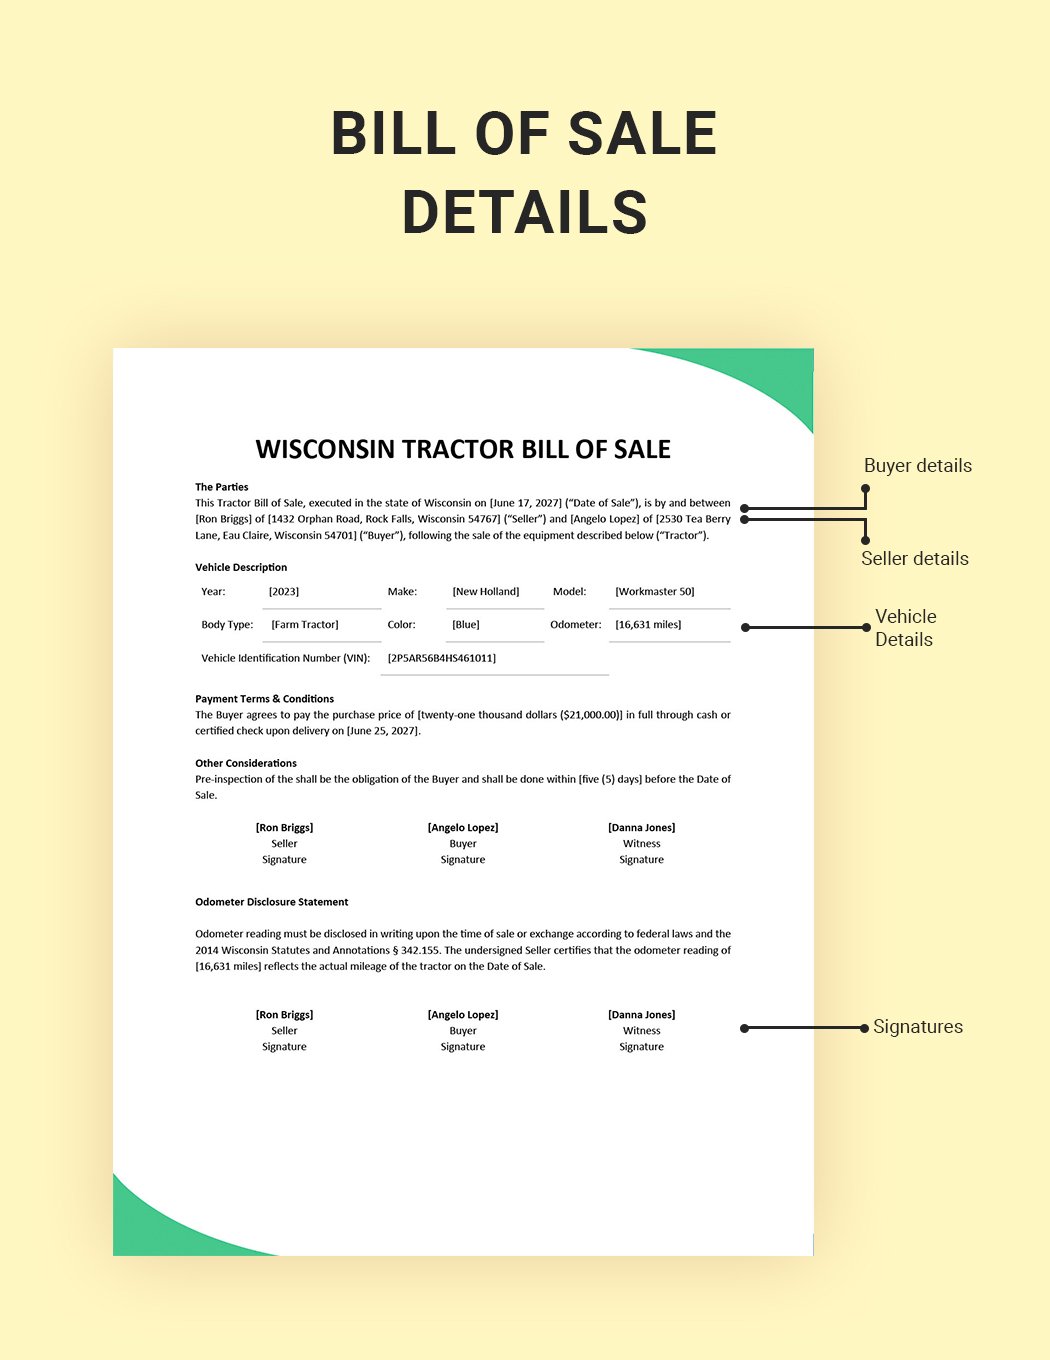 Wisconsin Tractor Bill of Sale Template